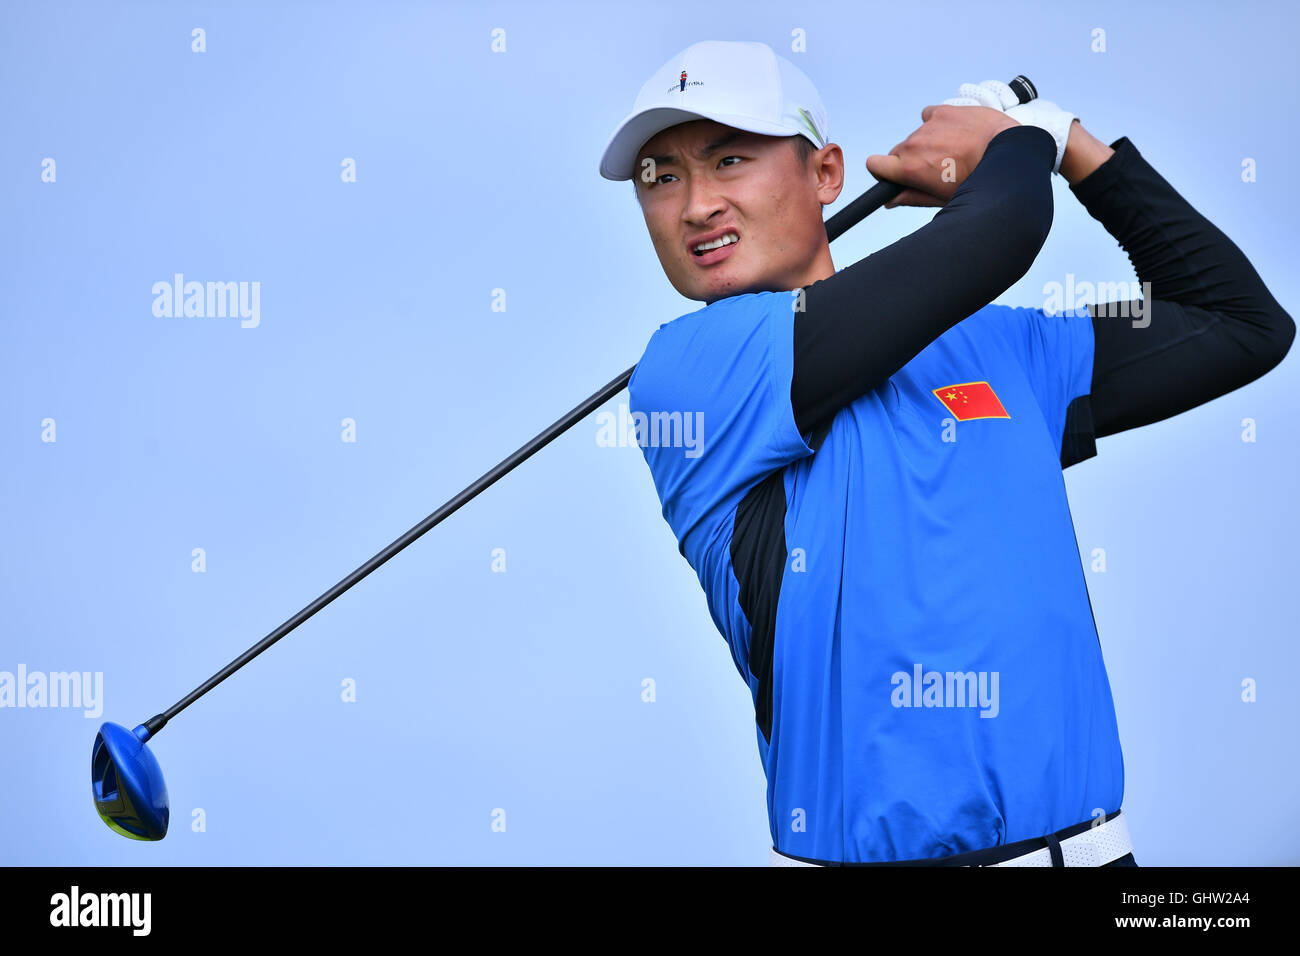 Rio de Janeiro, Brazil. 11th Aug, 2016. Haotong Li of China in action during the Men's Individual Stroke Play Round 1 of the Golf events during the Olympic Games at the Olympic Golf Course in Rio de Janeiro, Brazil, 11 August 2016. Photo: Lukas Schulze/dpa/Alamy Live News Stock Photo